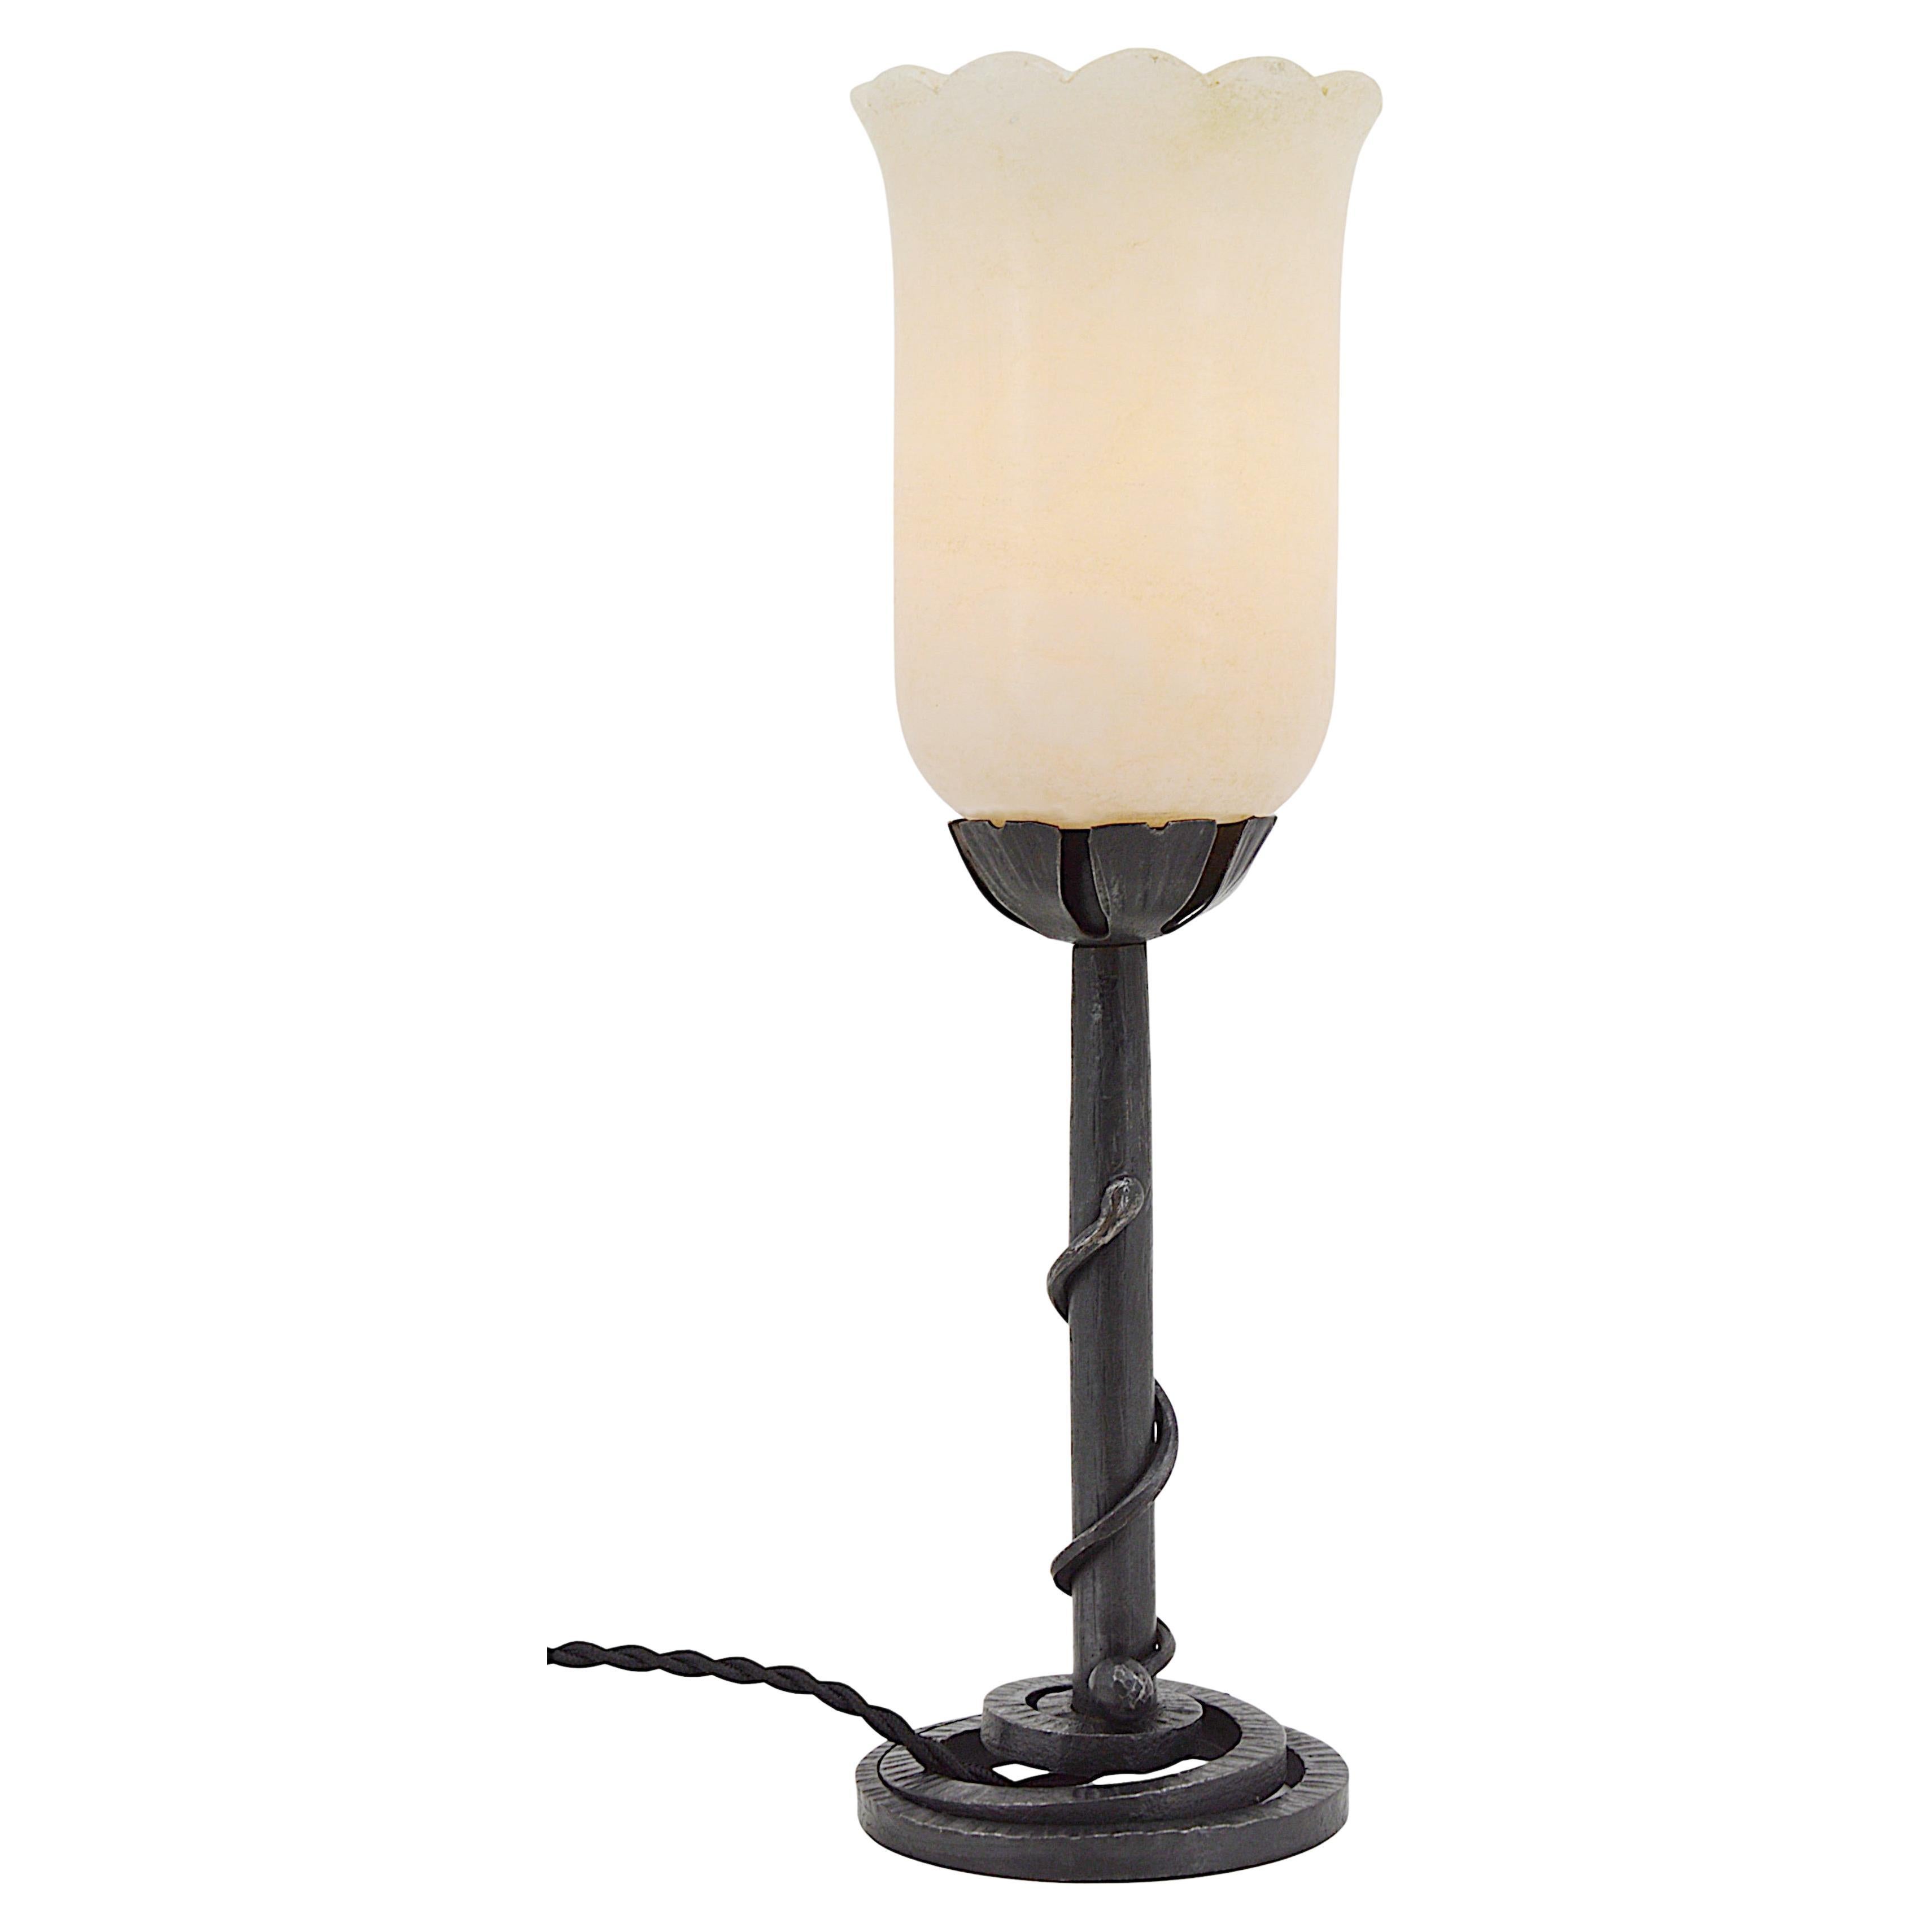 French Art Deco Alabaster & Snake Wrought-Iron Table Lamp, 1920s